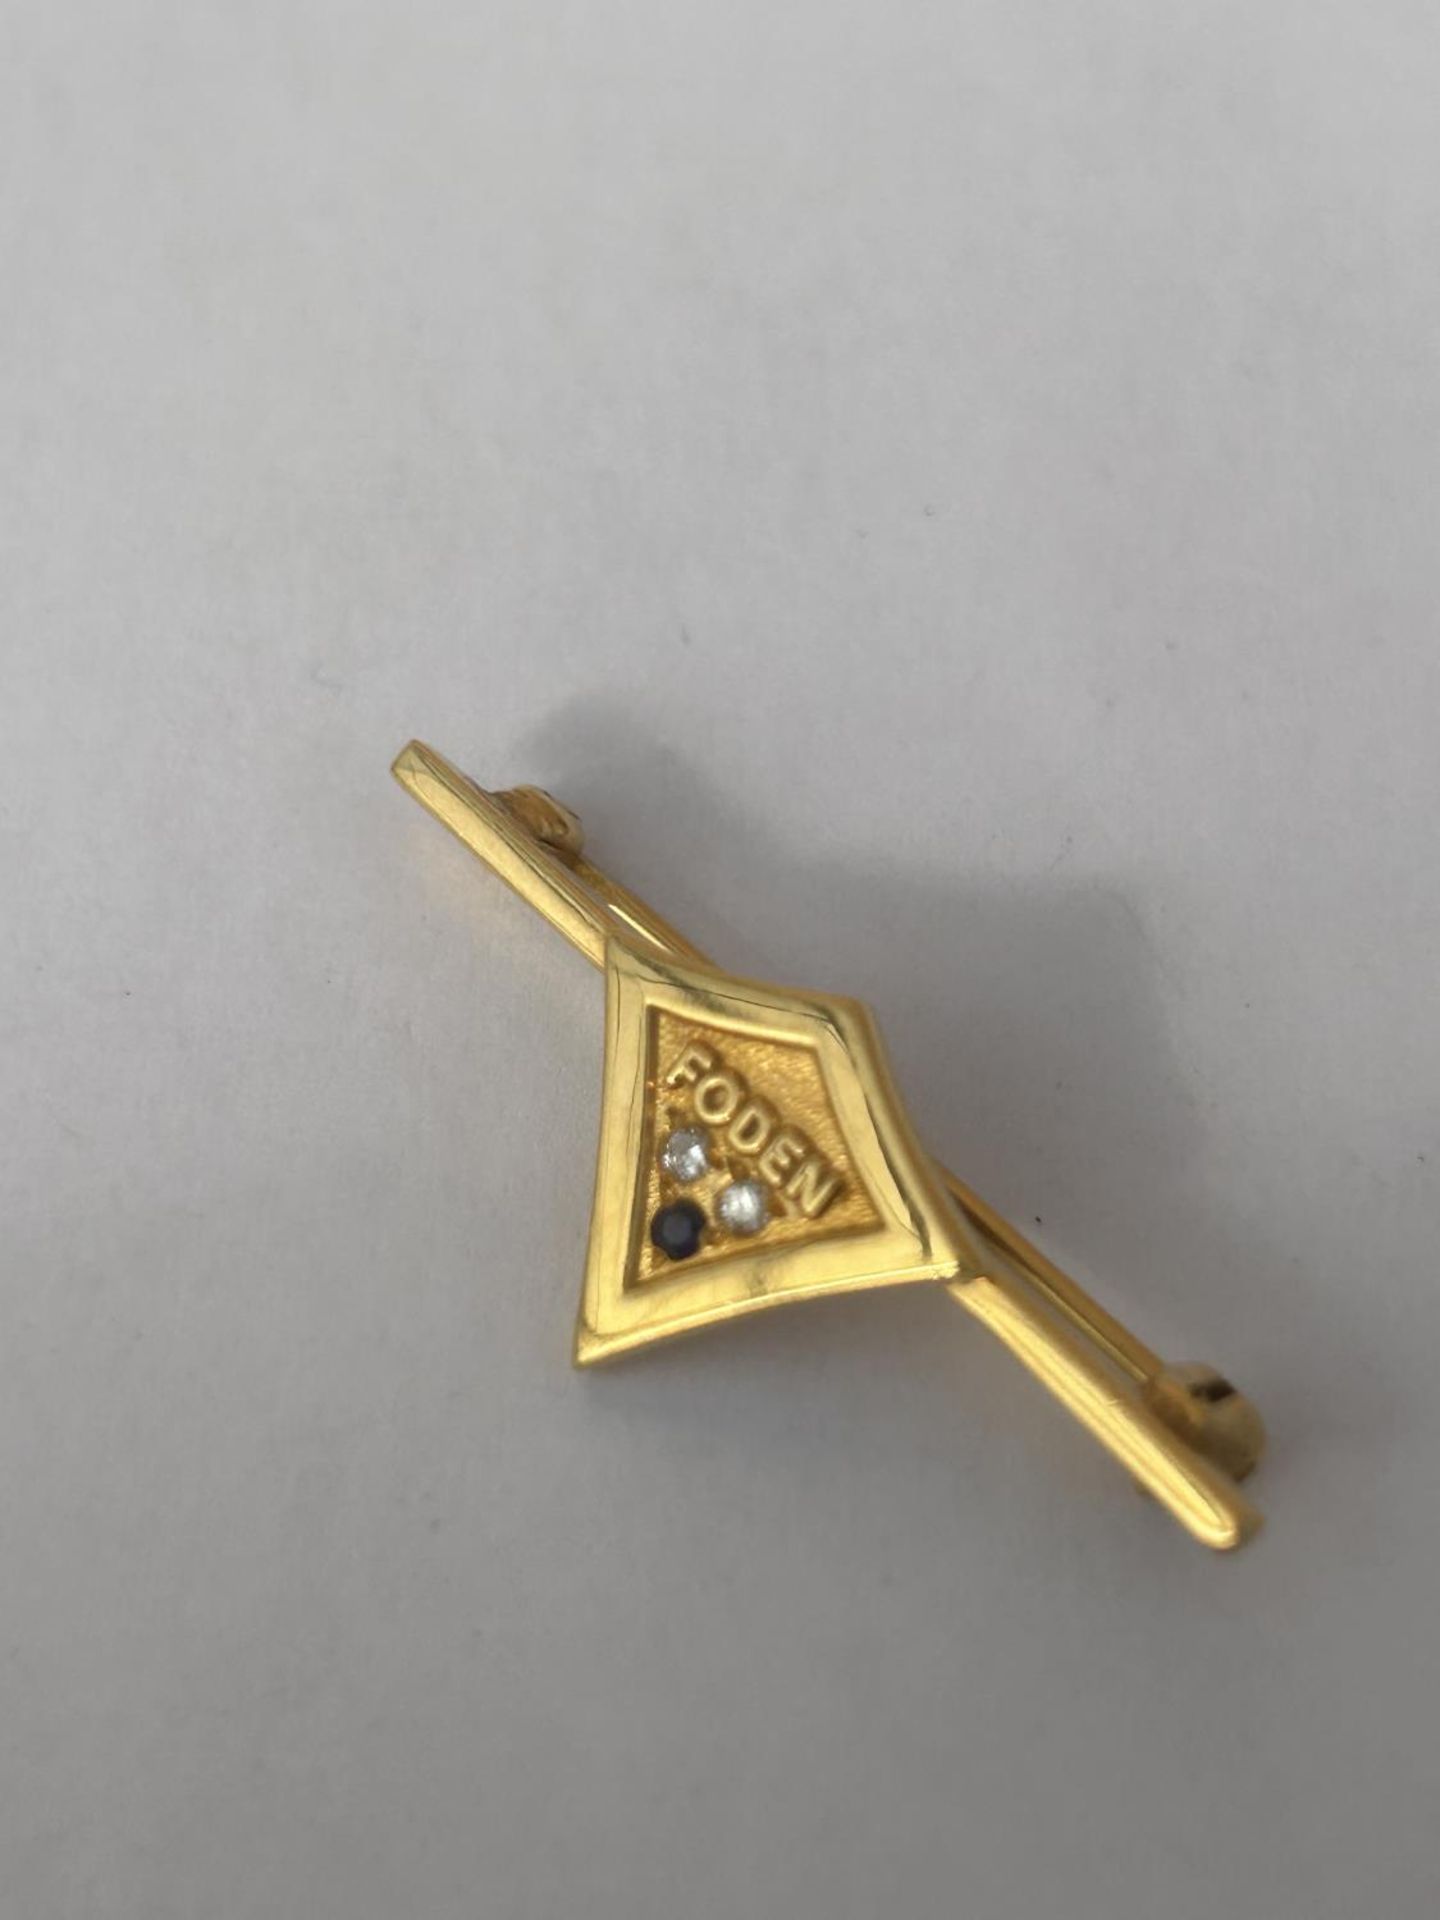 A HALLMARKED 9CT GOLD DIAMOND AND SAPPHIRE FODEN TRUCKS LAPEL BADGE WEIGHT 3.37 G - Image 2 of 4